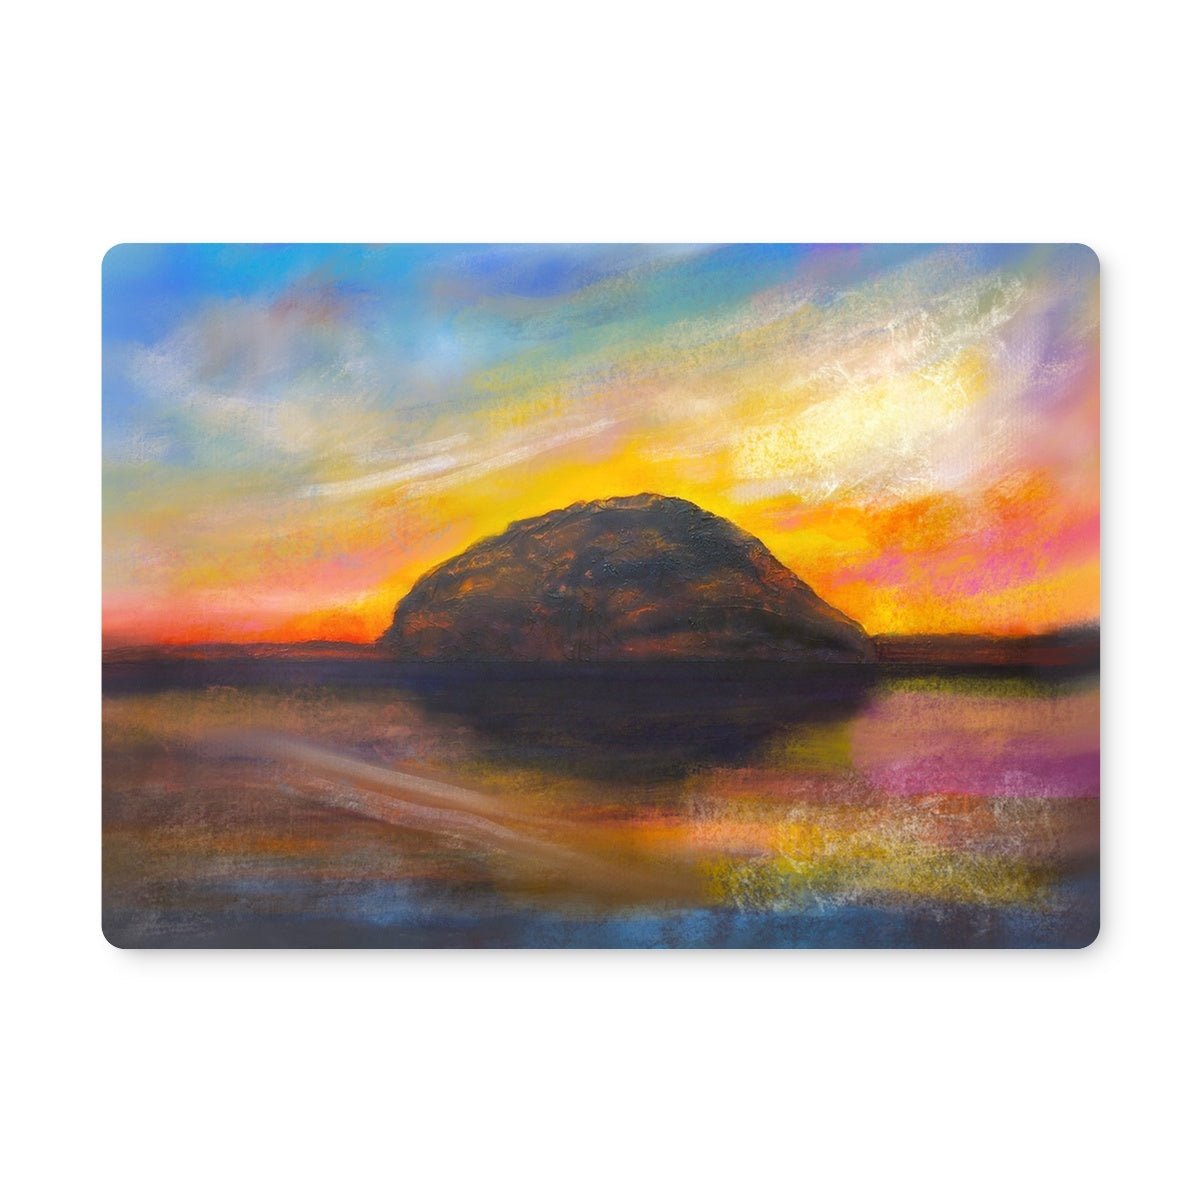 Ailsa Craig Dusk Arran Art Gifts Placemat-Placemats-Arran Art Gallery-6 Placemats-Paintings, Prints, Homeware, Art Gifts From Scotland By Scottish Artist Kevin Hunter